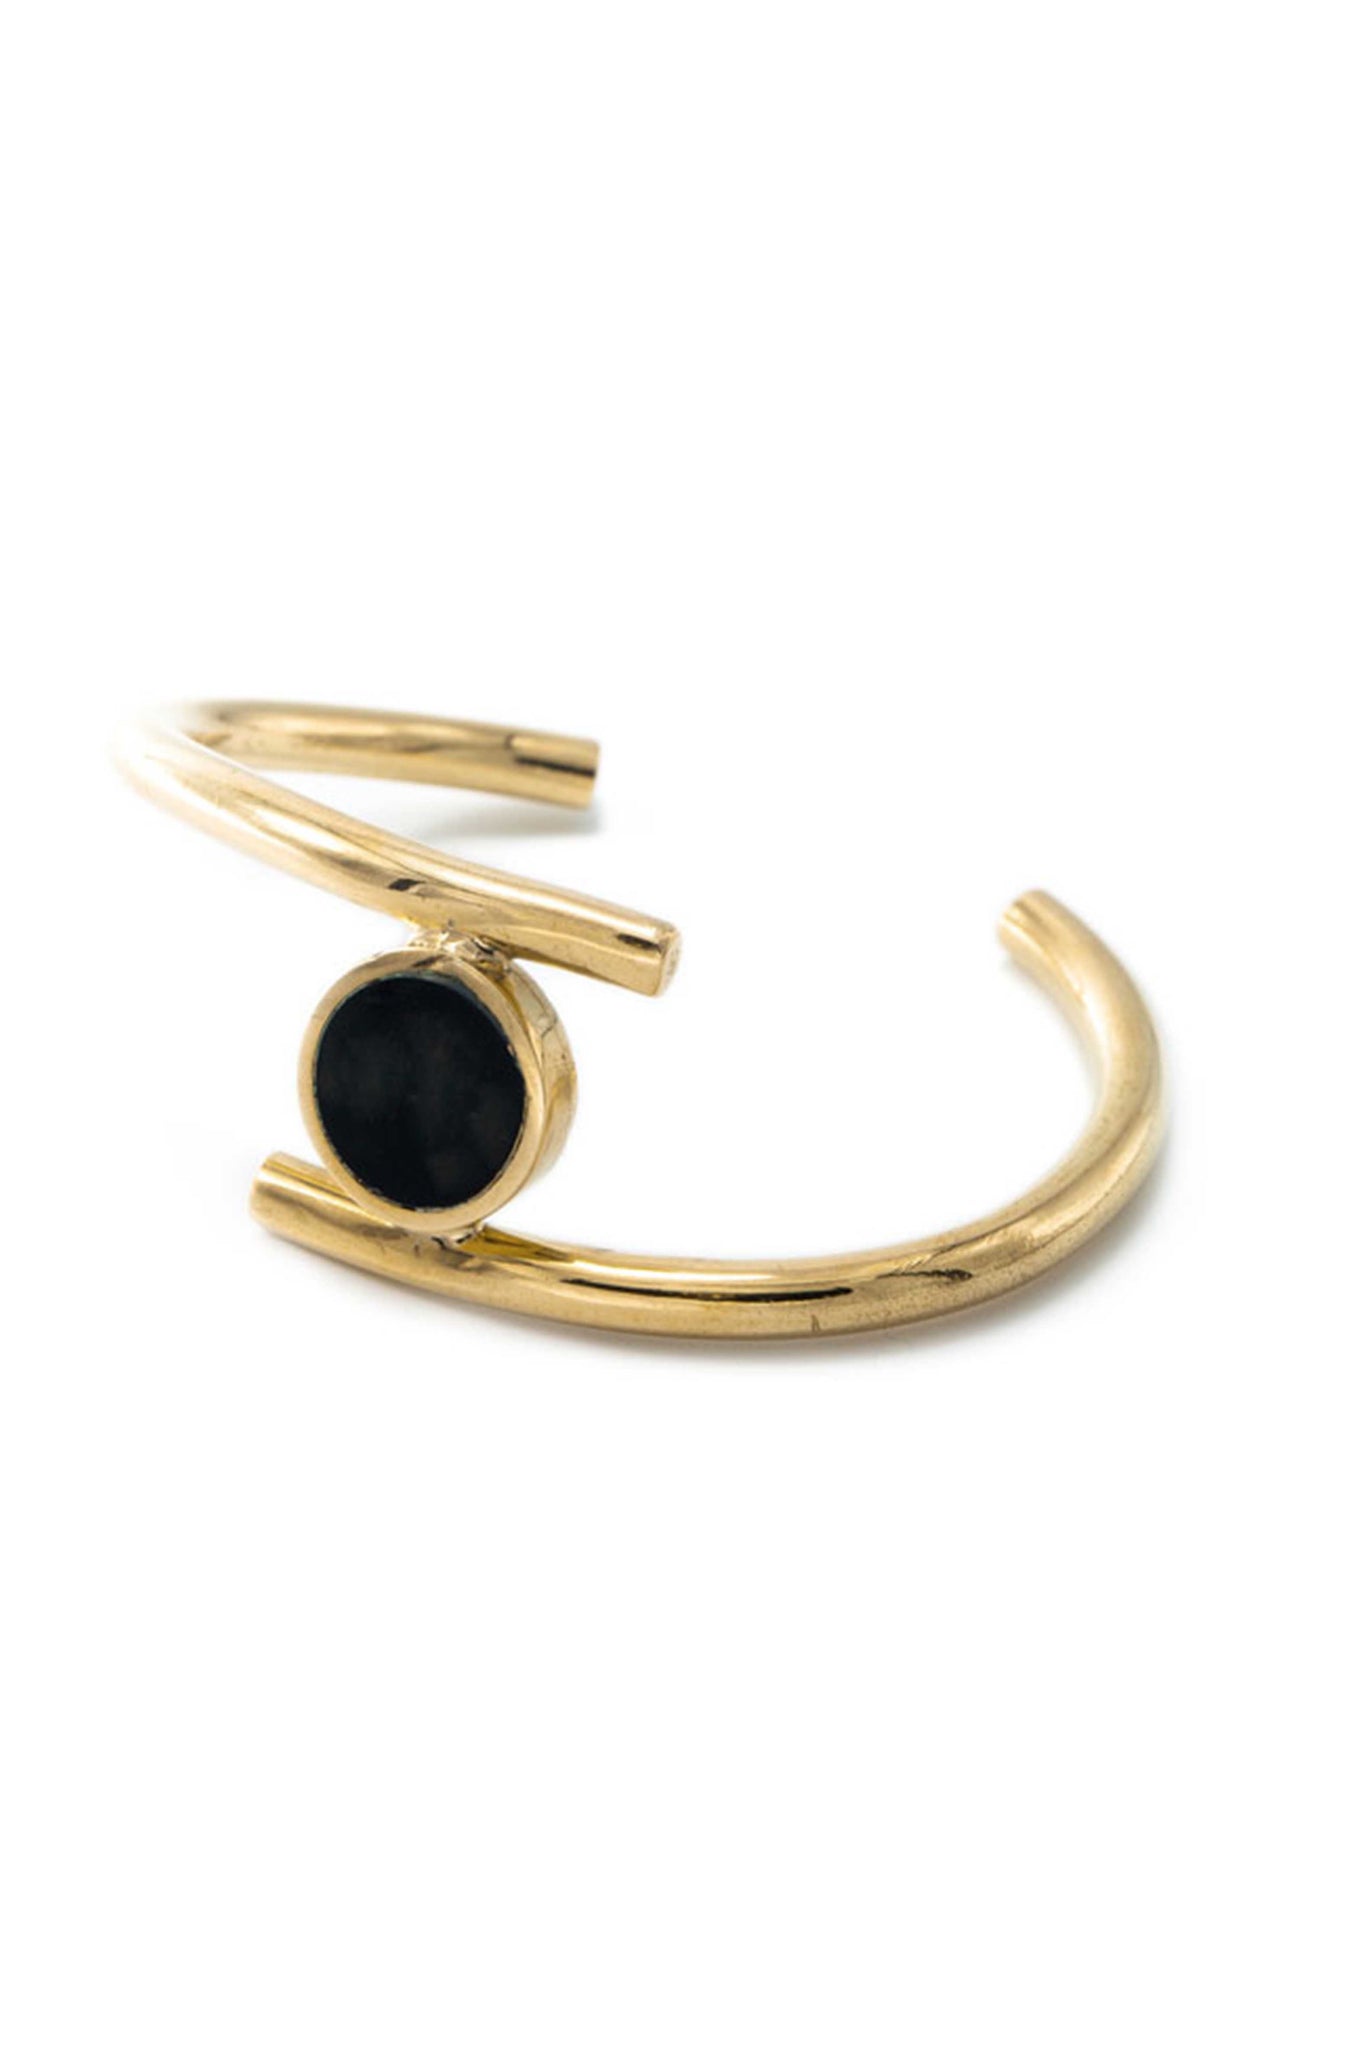 Soko Spring 2018 Lucine Statement Cuff Bracelet. Cast brass statement cuff with carved circular horn medallion accent. Handcrafted in Kenya using traditional artisan techniques. Color gold black. Recycled polished brass. Hand carved horn. Adjustable size.